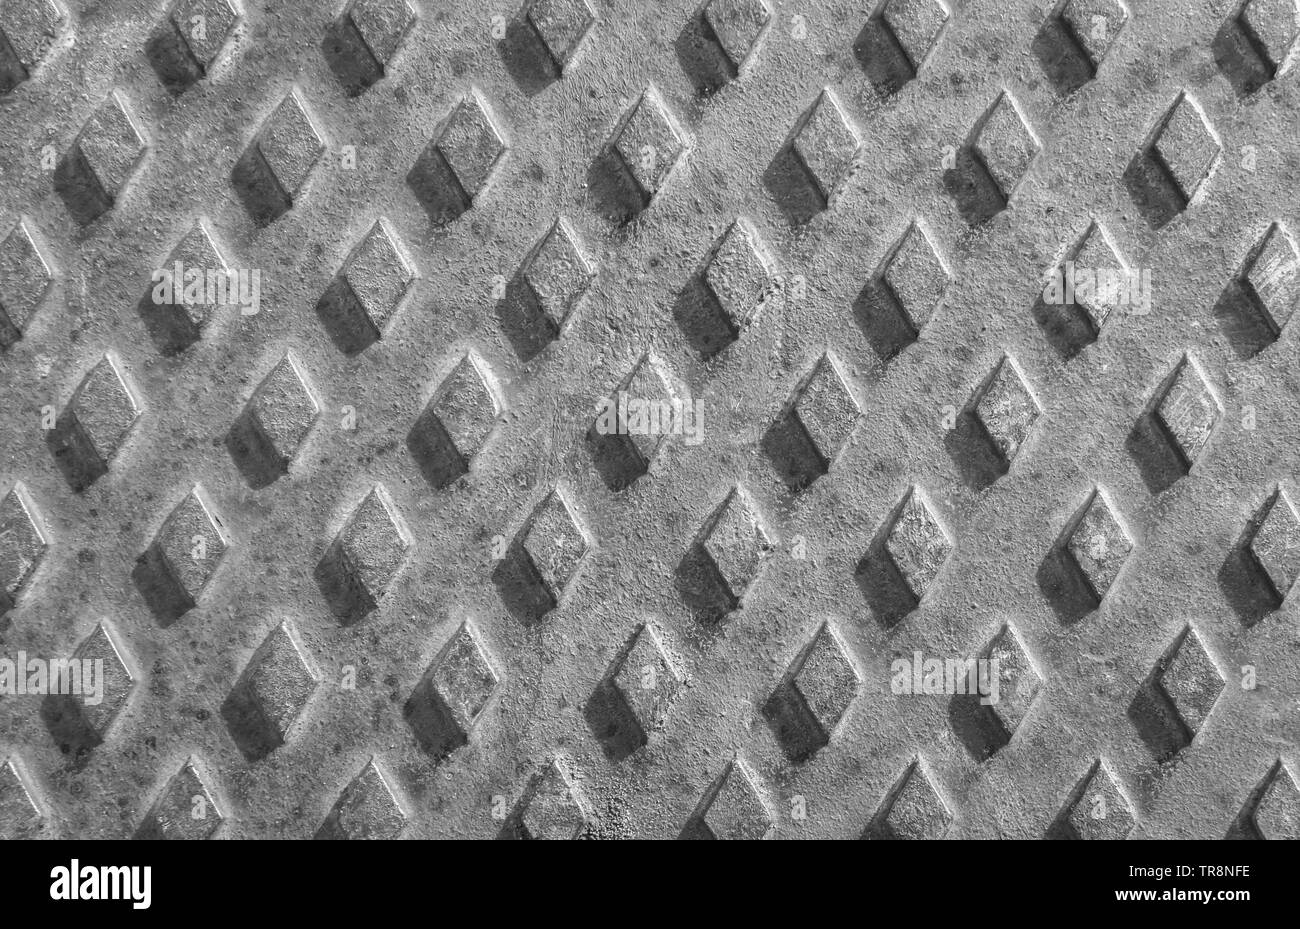 Old rusty drain cover background with diamond pattern. Stock Photo